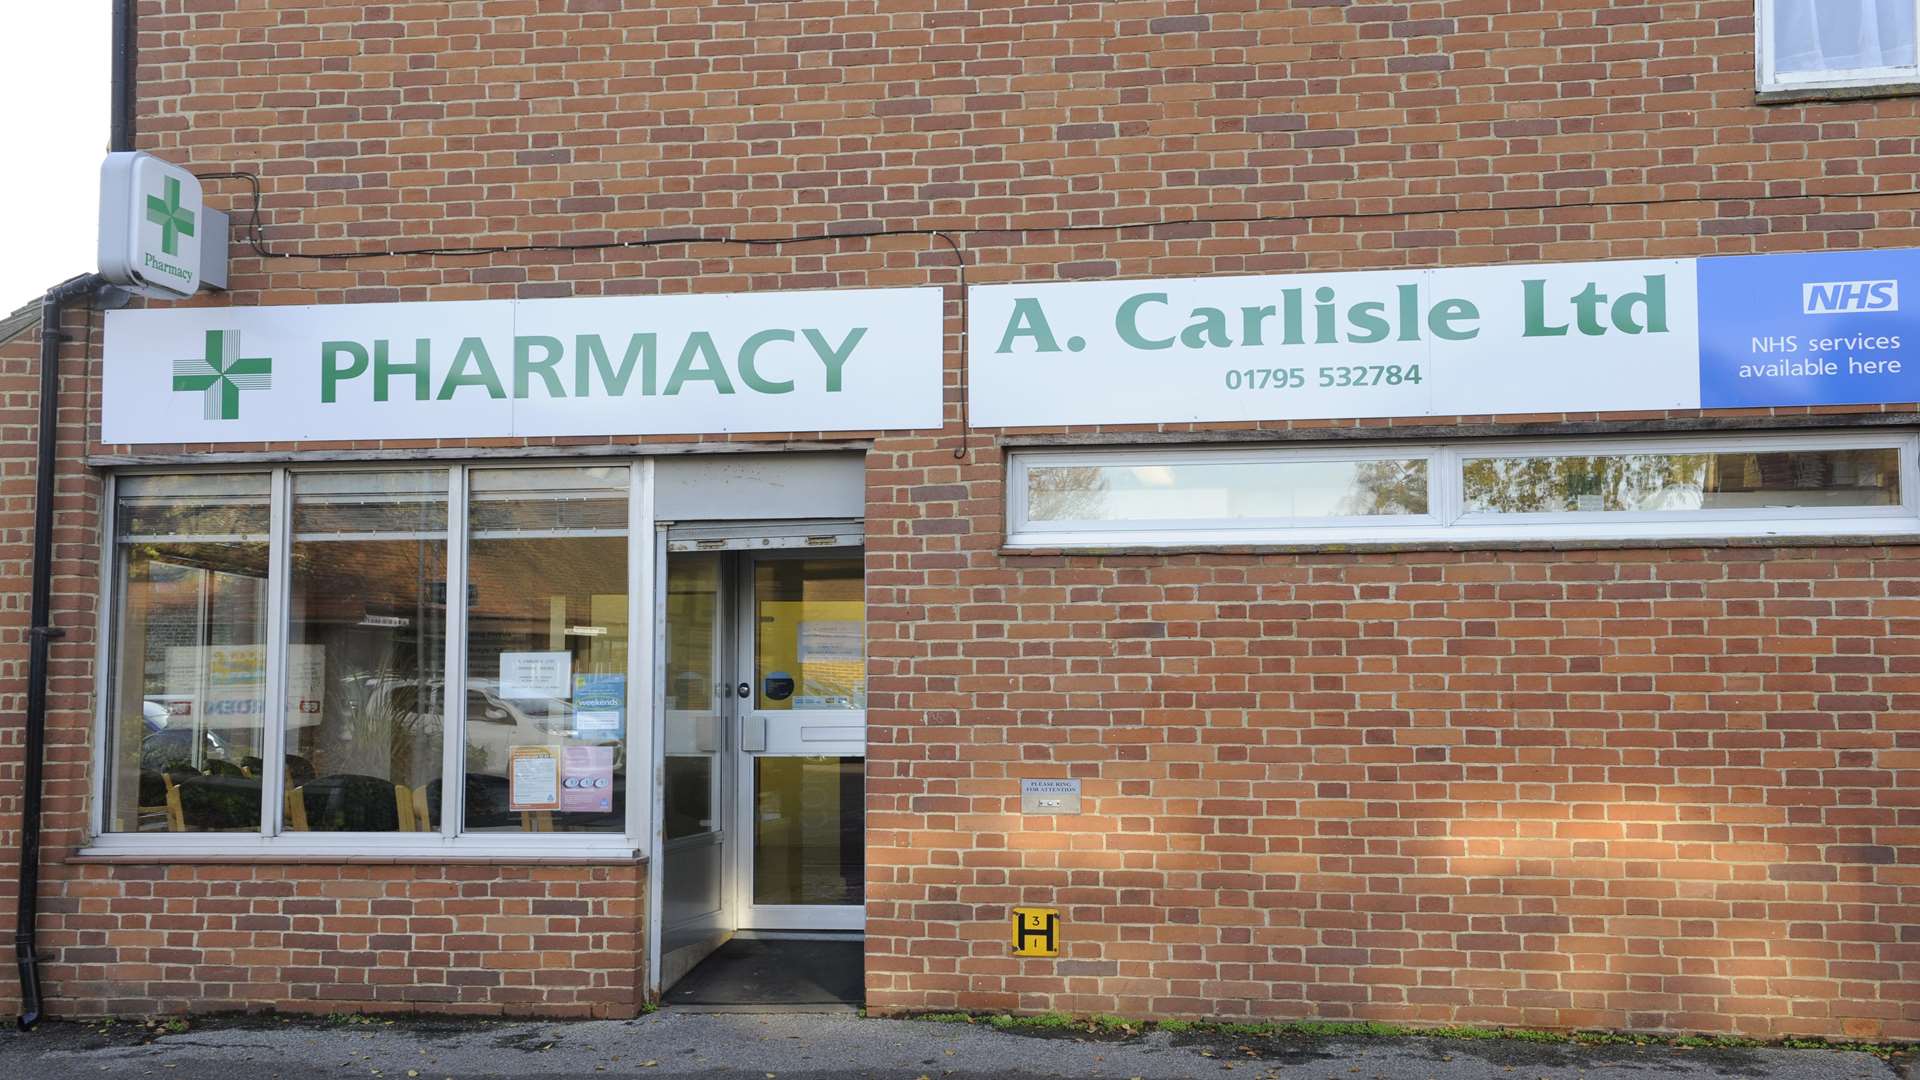 Carlisle Pharmacy in Bank Street where the knifepoint robbery took place.